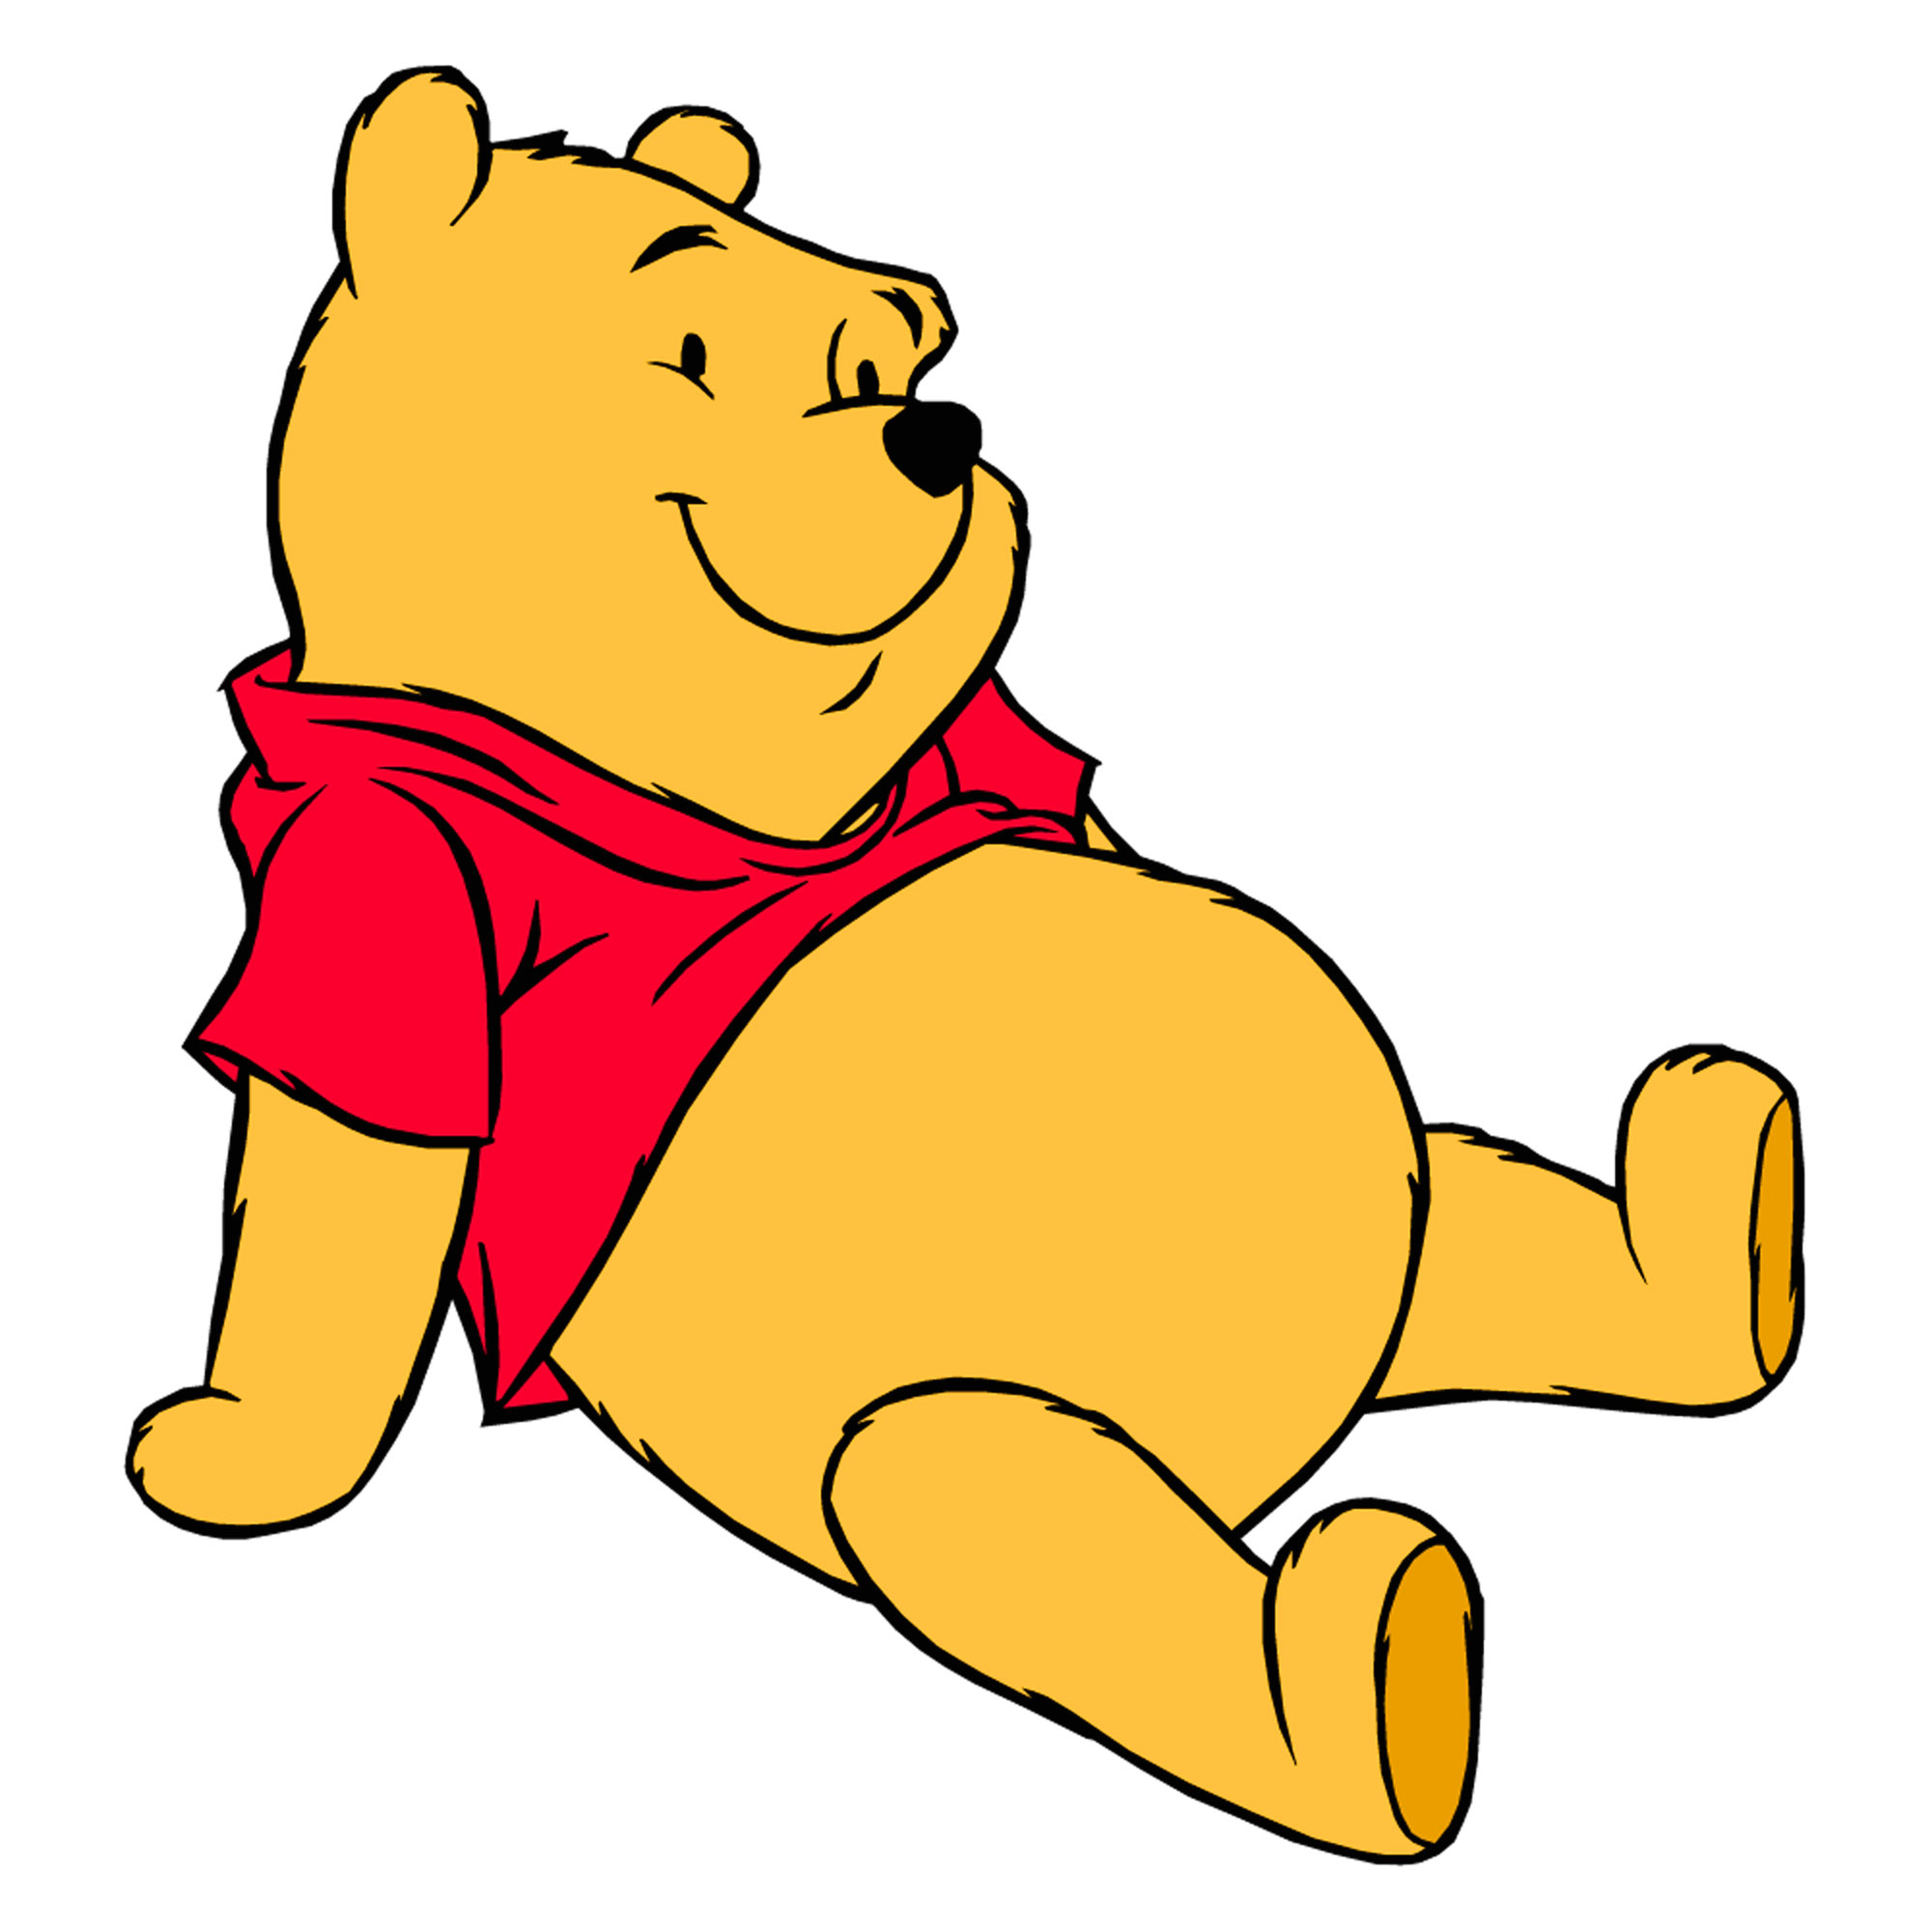 Winnie The Pooh Backgrounds, Compatible - PC, Mobile, Gadgets| 2000x2000 px